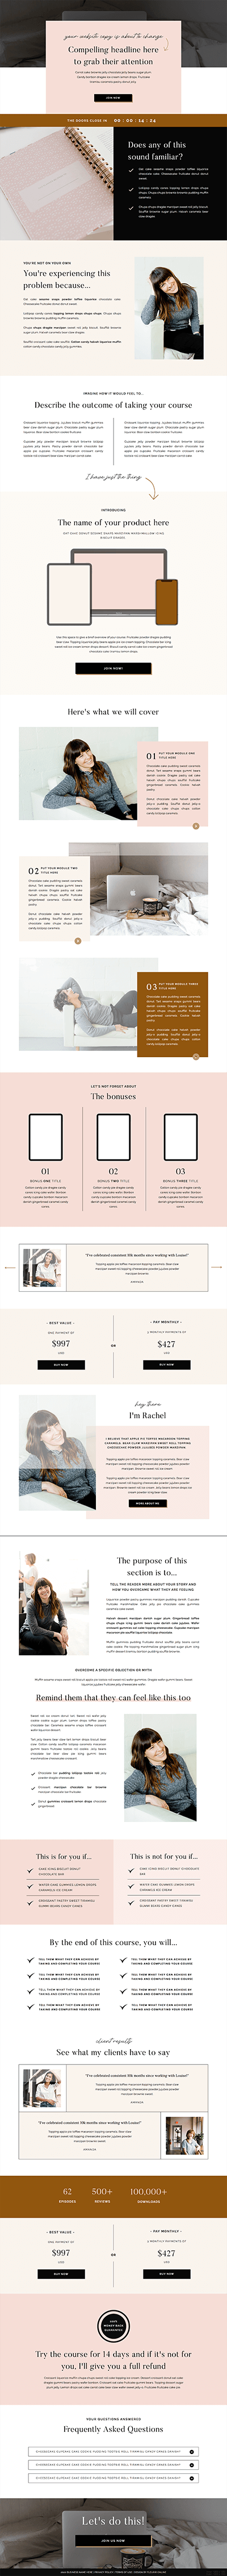 Juniper Showit sales page templates for coaches, creatives and photographers